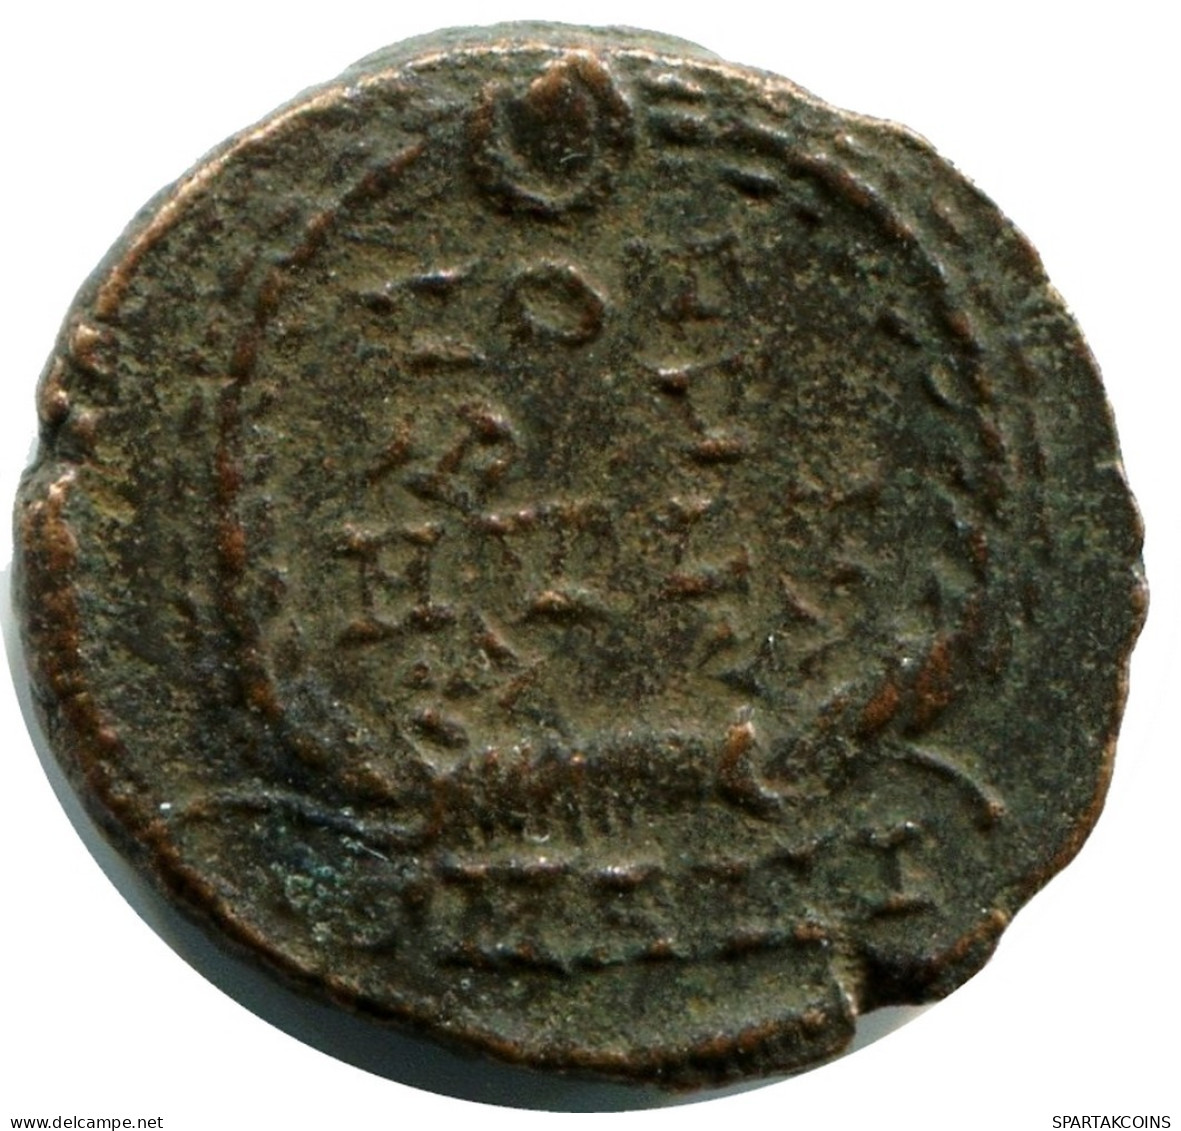 CONSTANS MINTED IN ANTIOCH FROM THE ROYAL ONTARIO MUSEUM #ANC11834.14.D.A - El Impero Christiano (307 / 363)